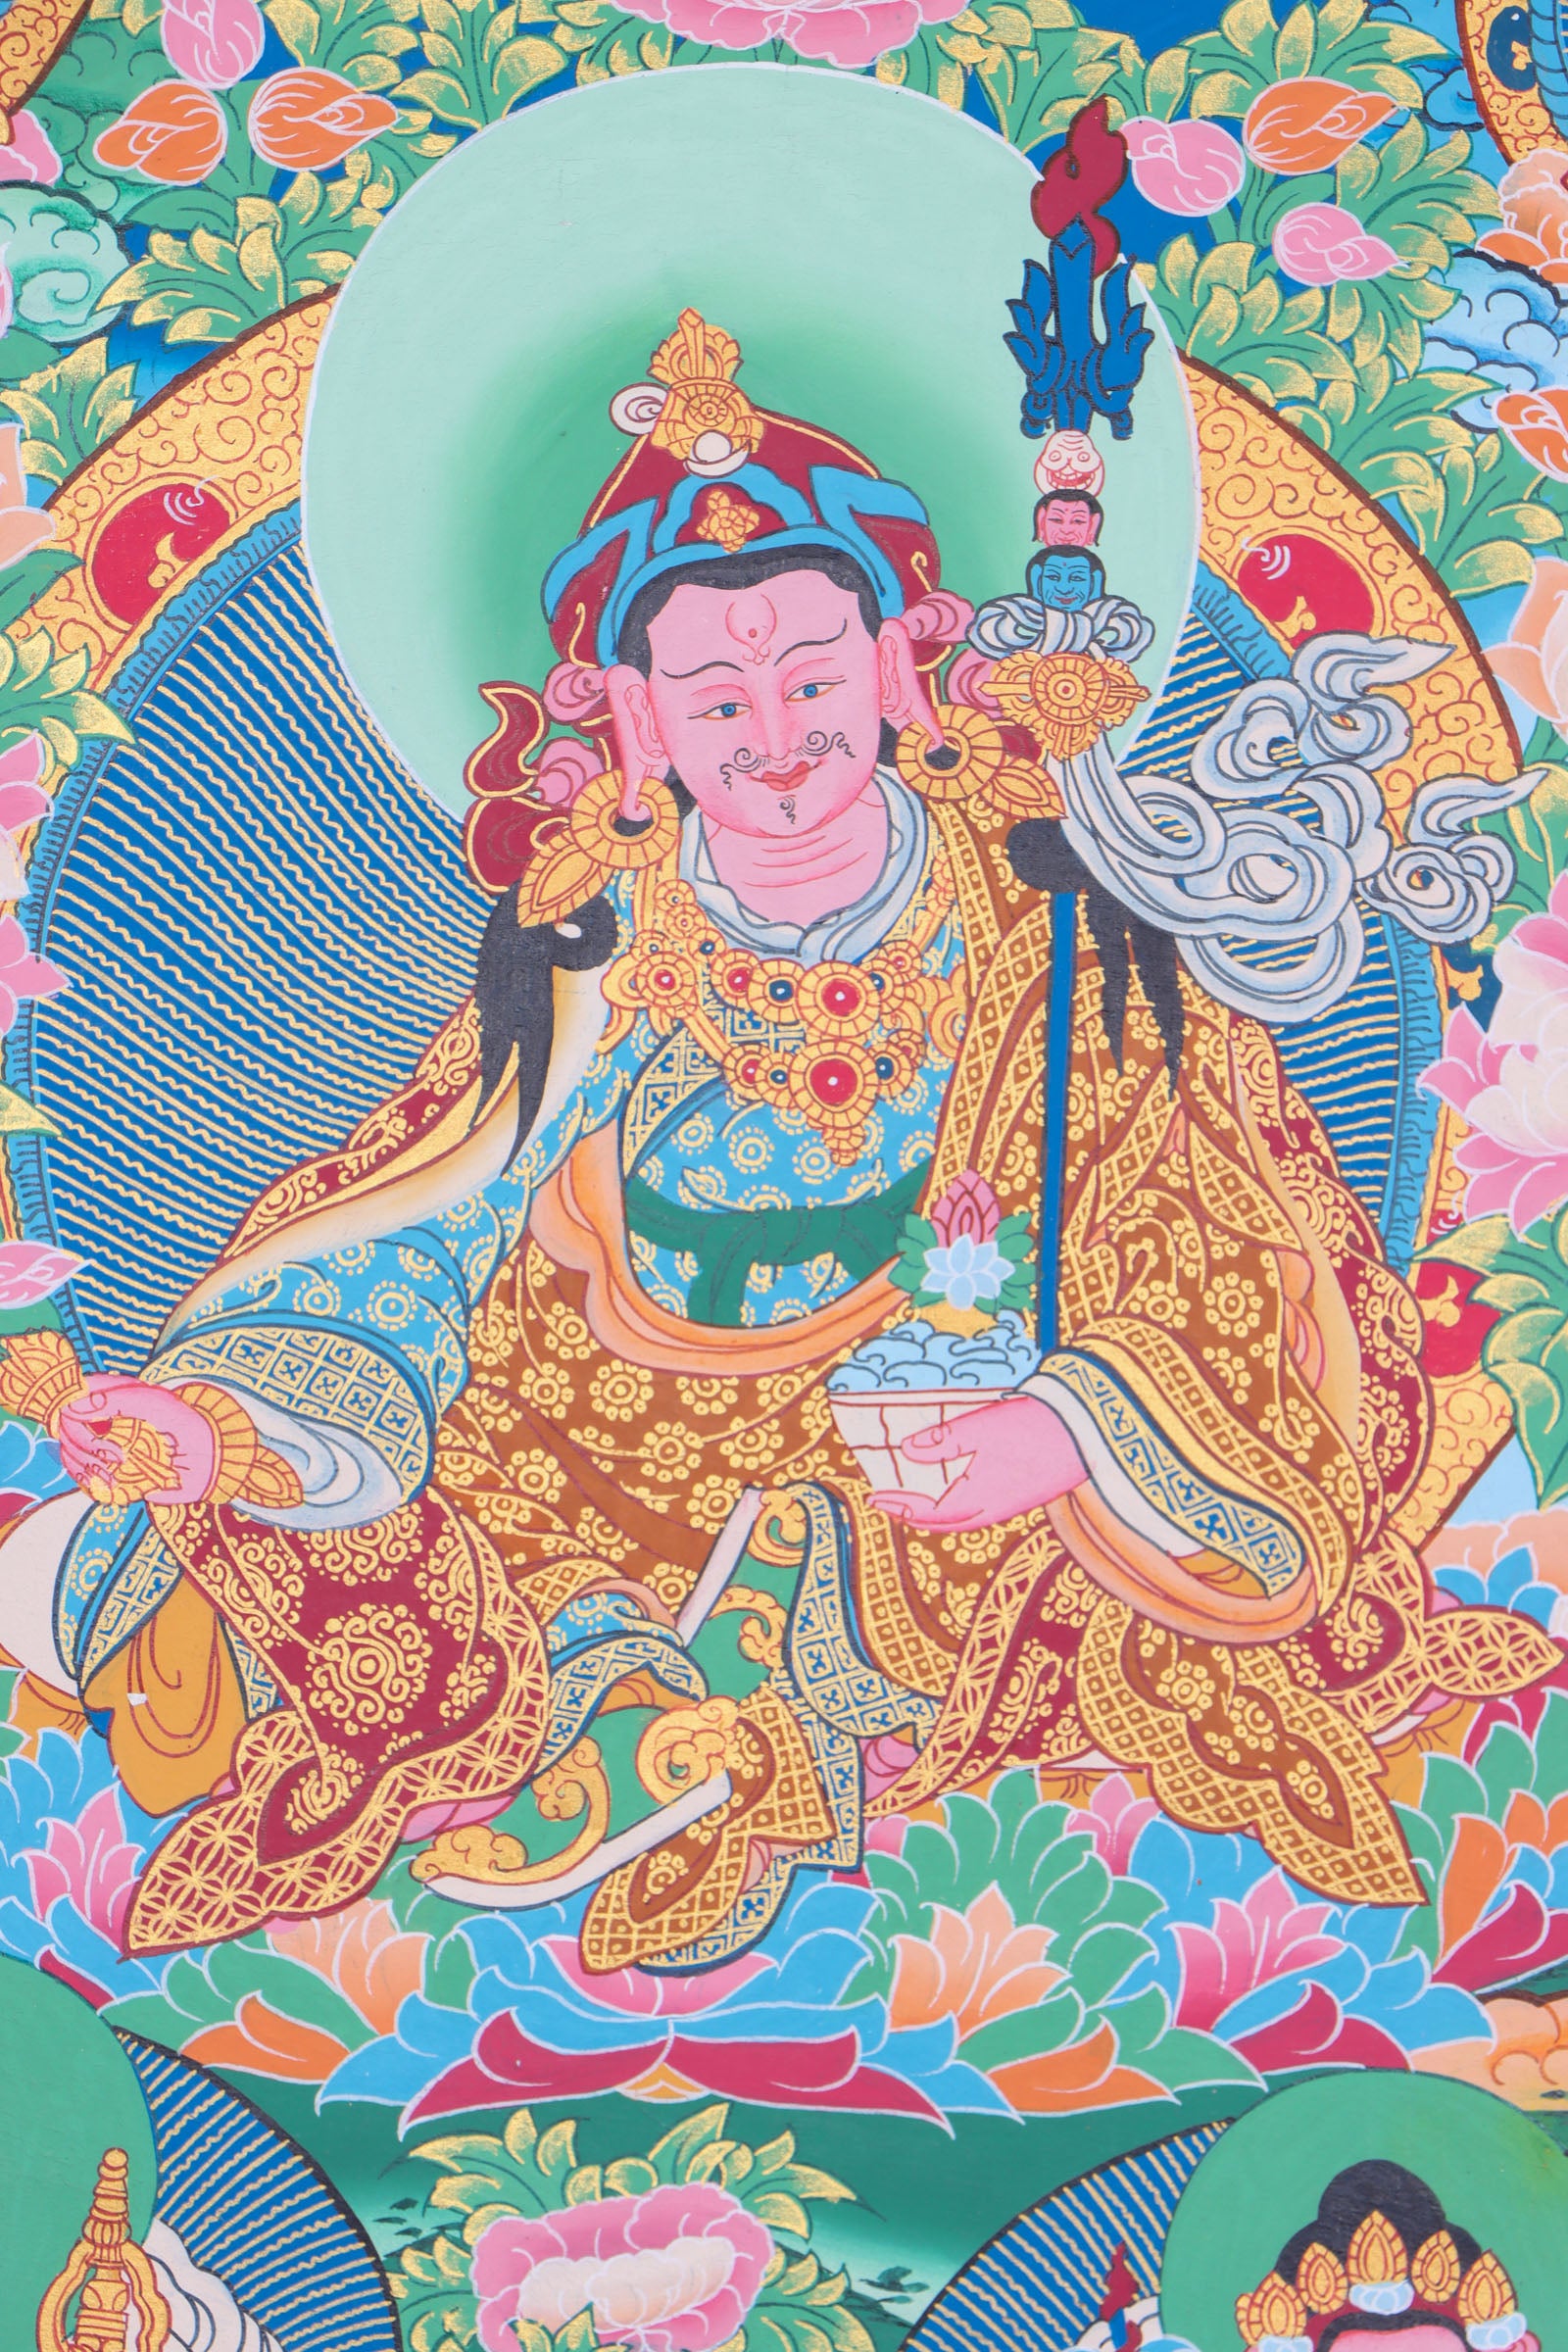 Guru Rinpoche Thangka helps to purify negative karma, and bring about inner peace and well-being.